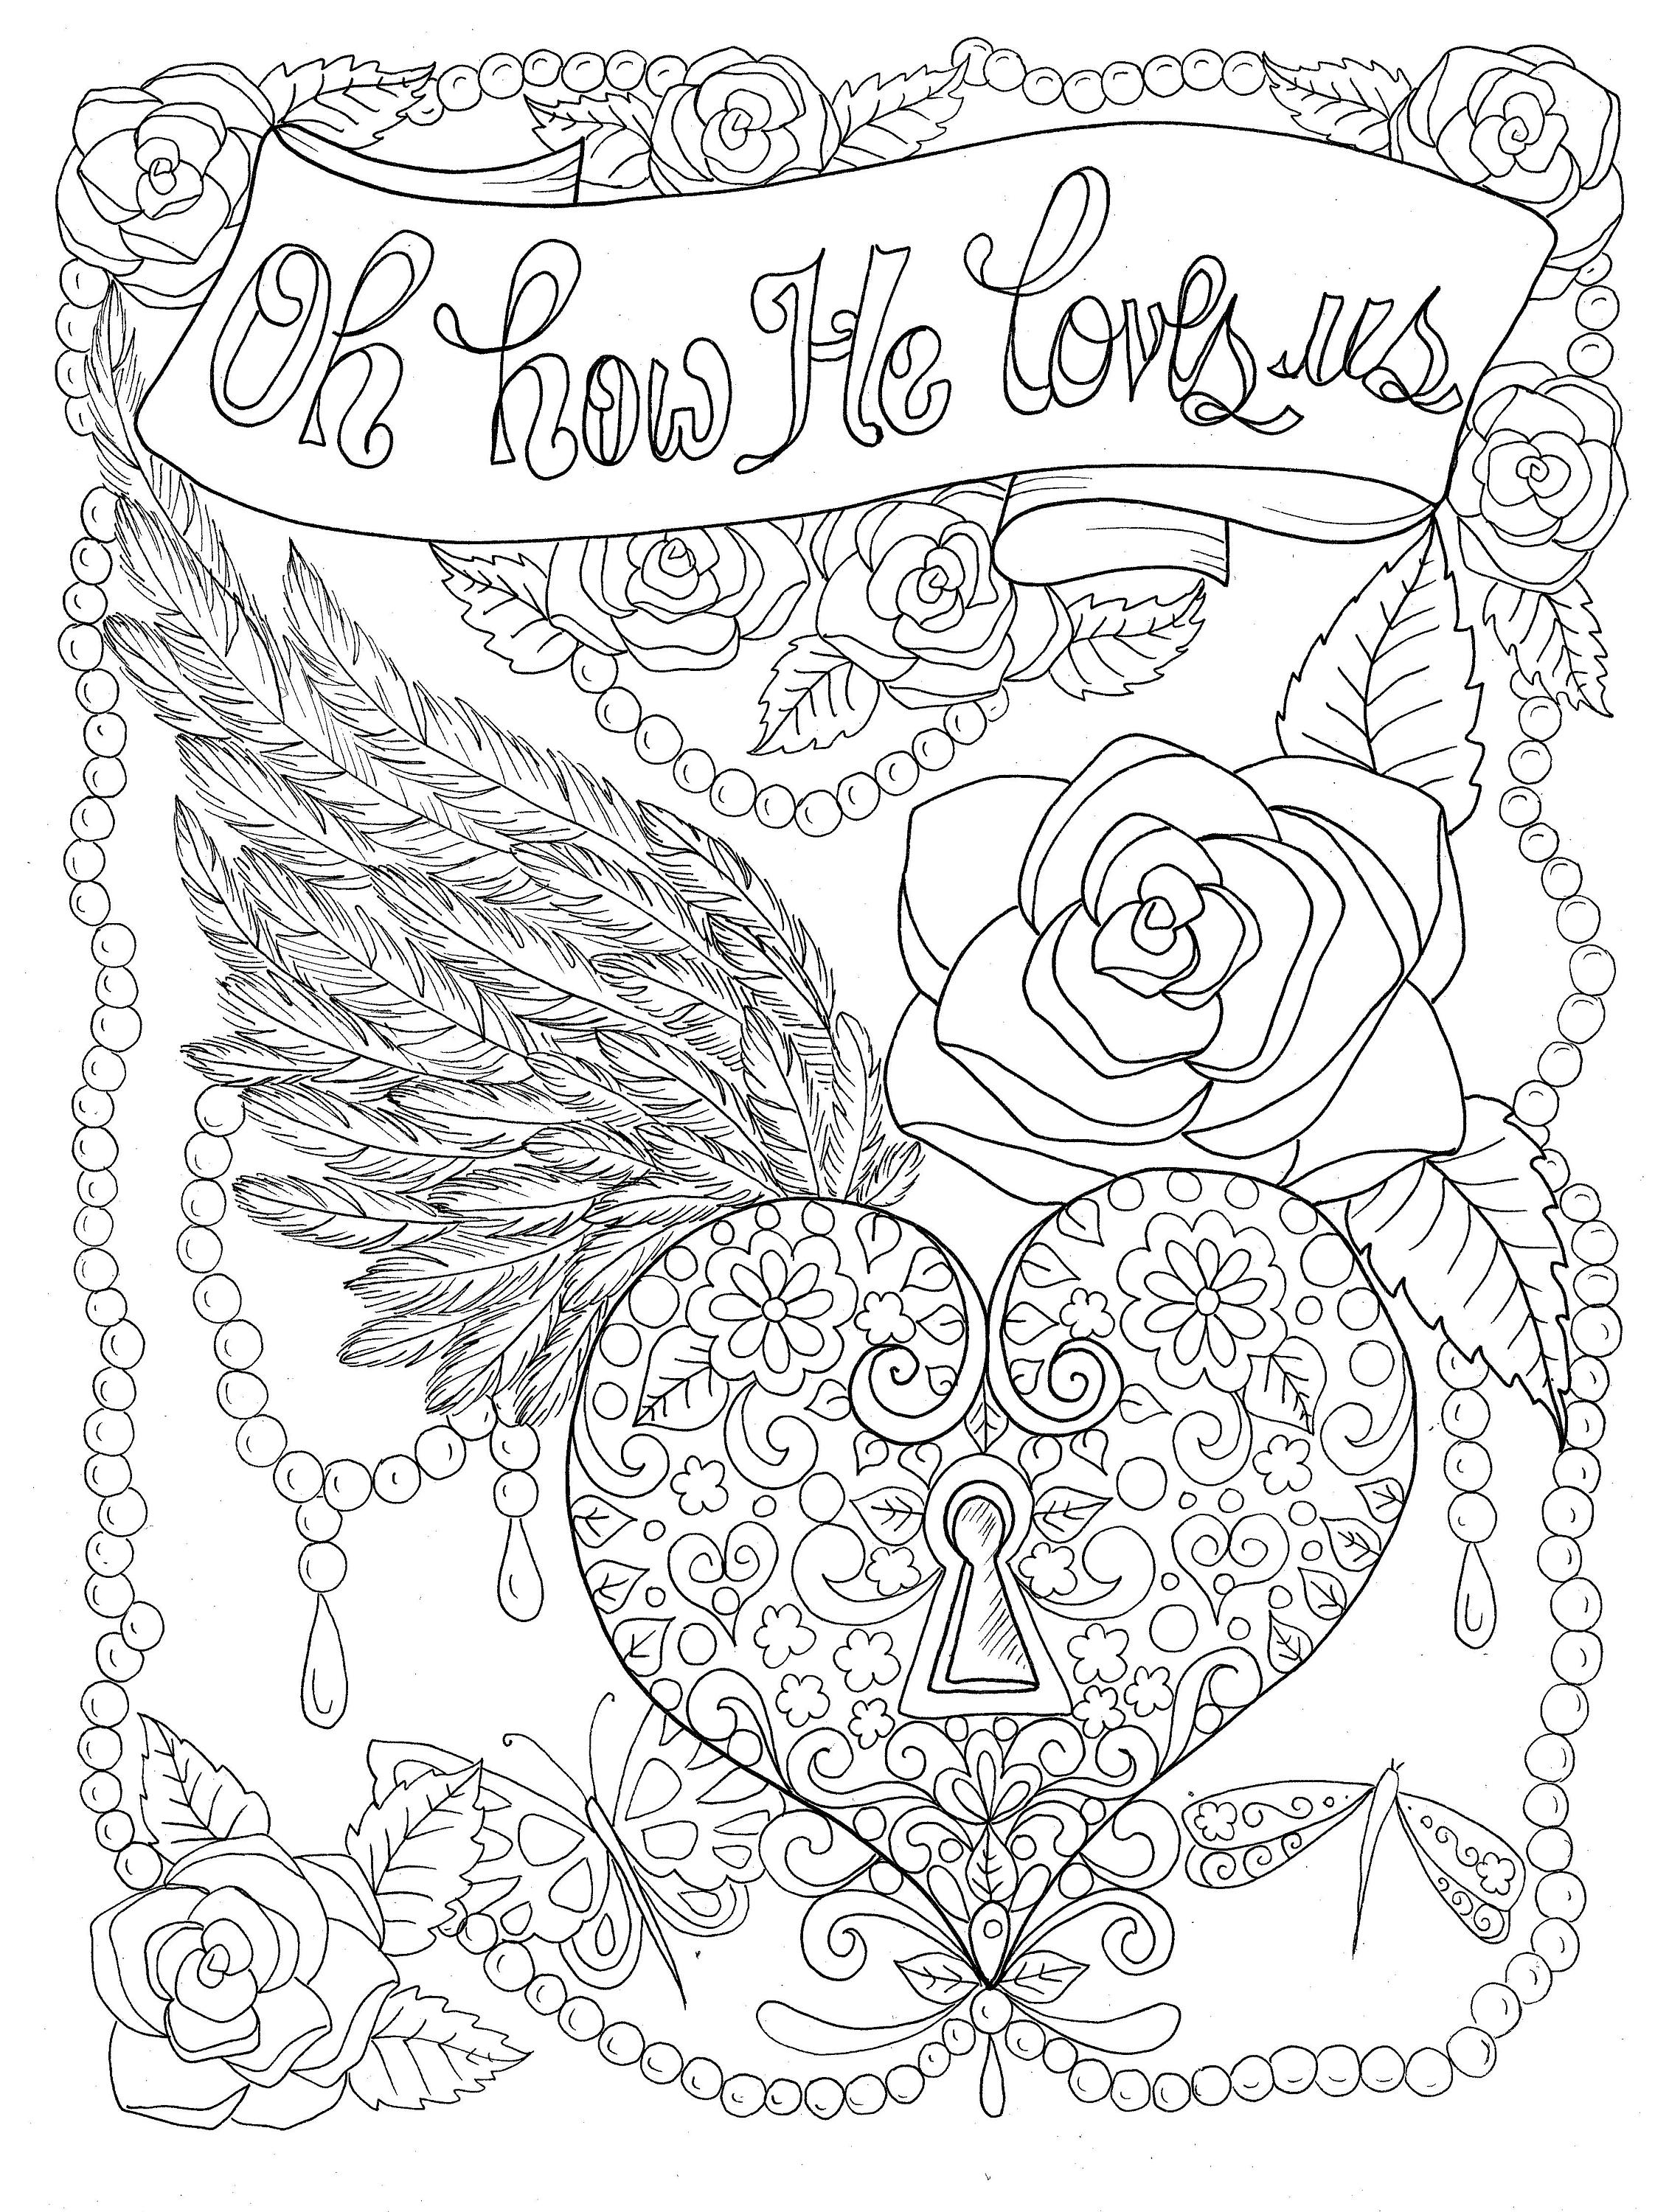 Christian worship coloring page instant downloadchurch biblegodhymns musiccolor bookadult coloring